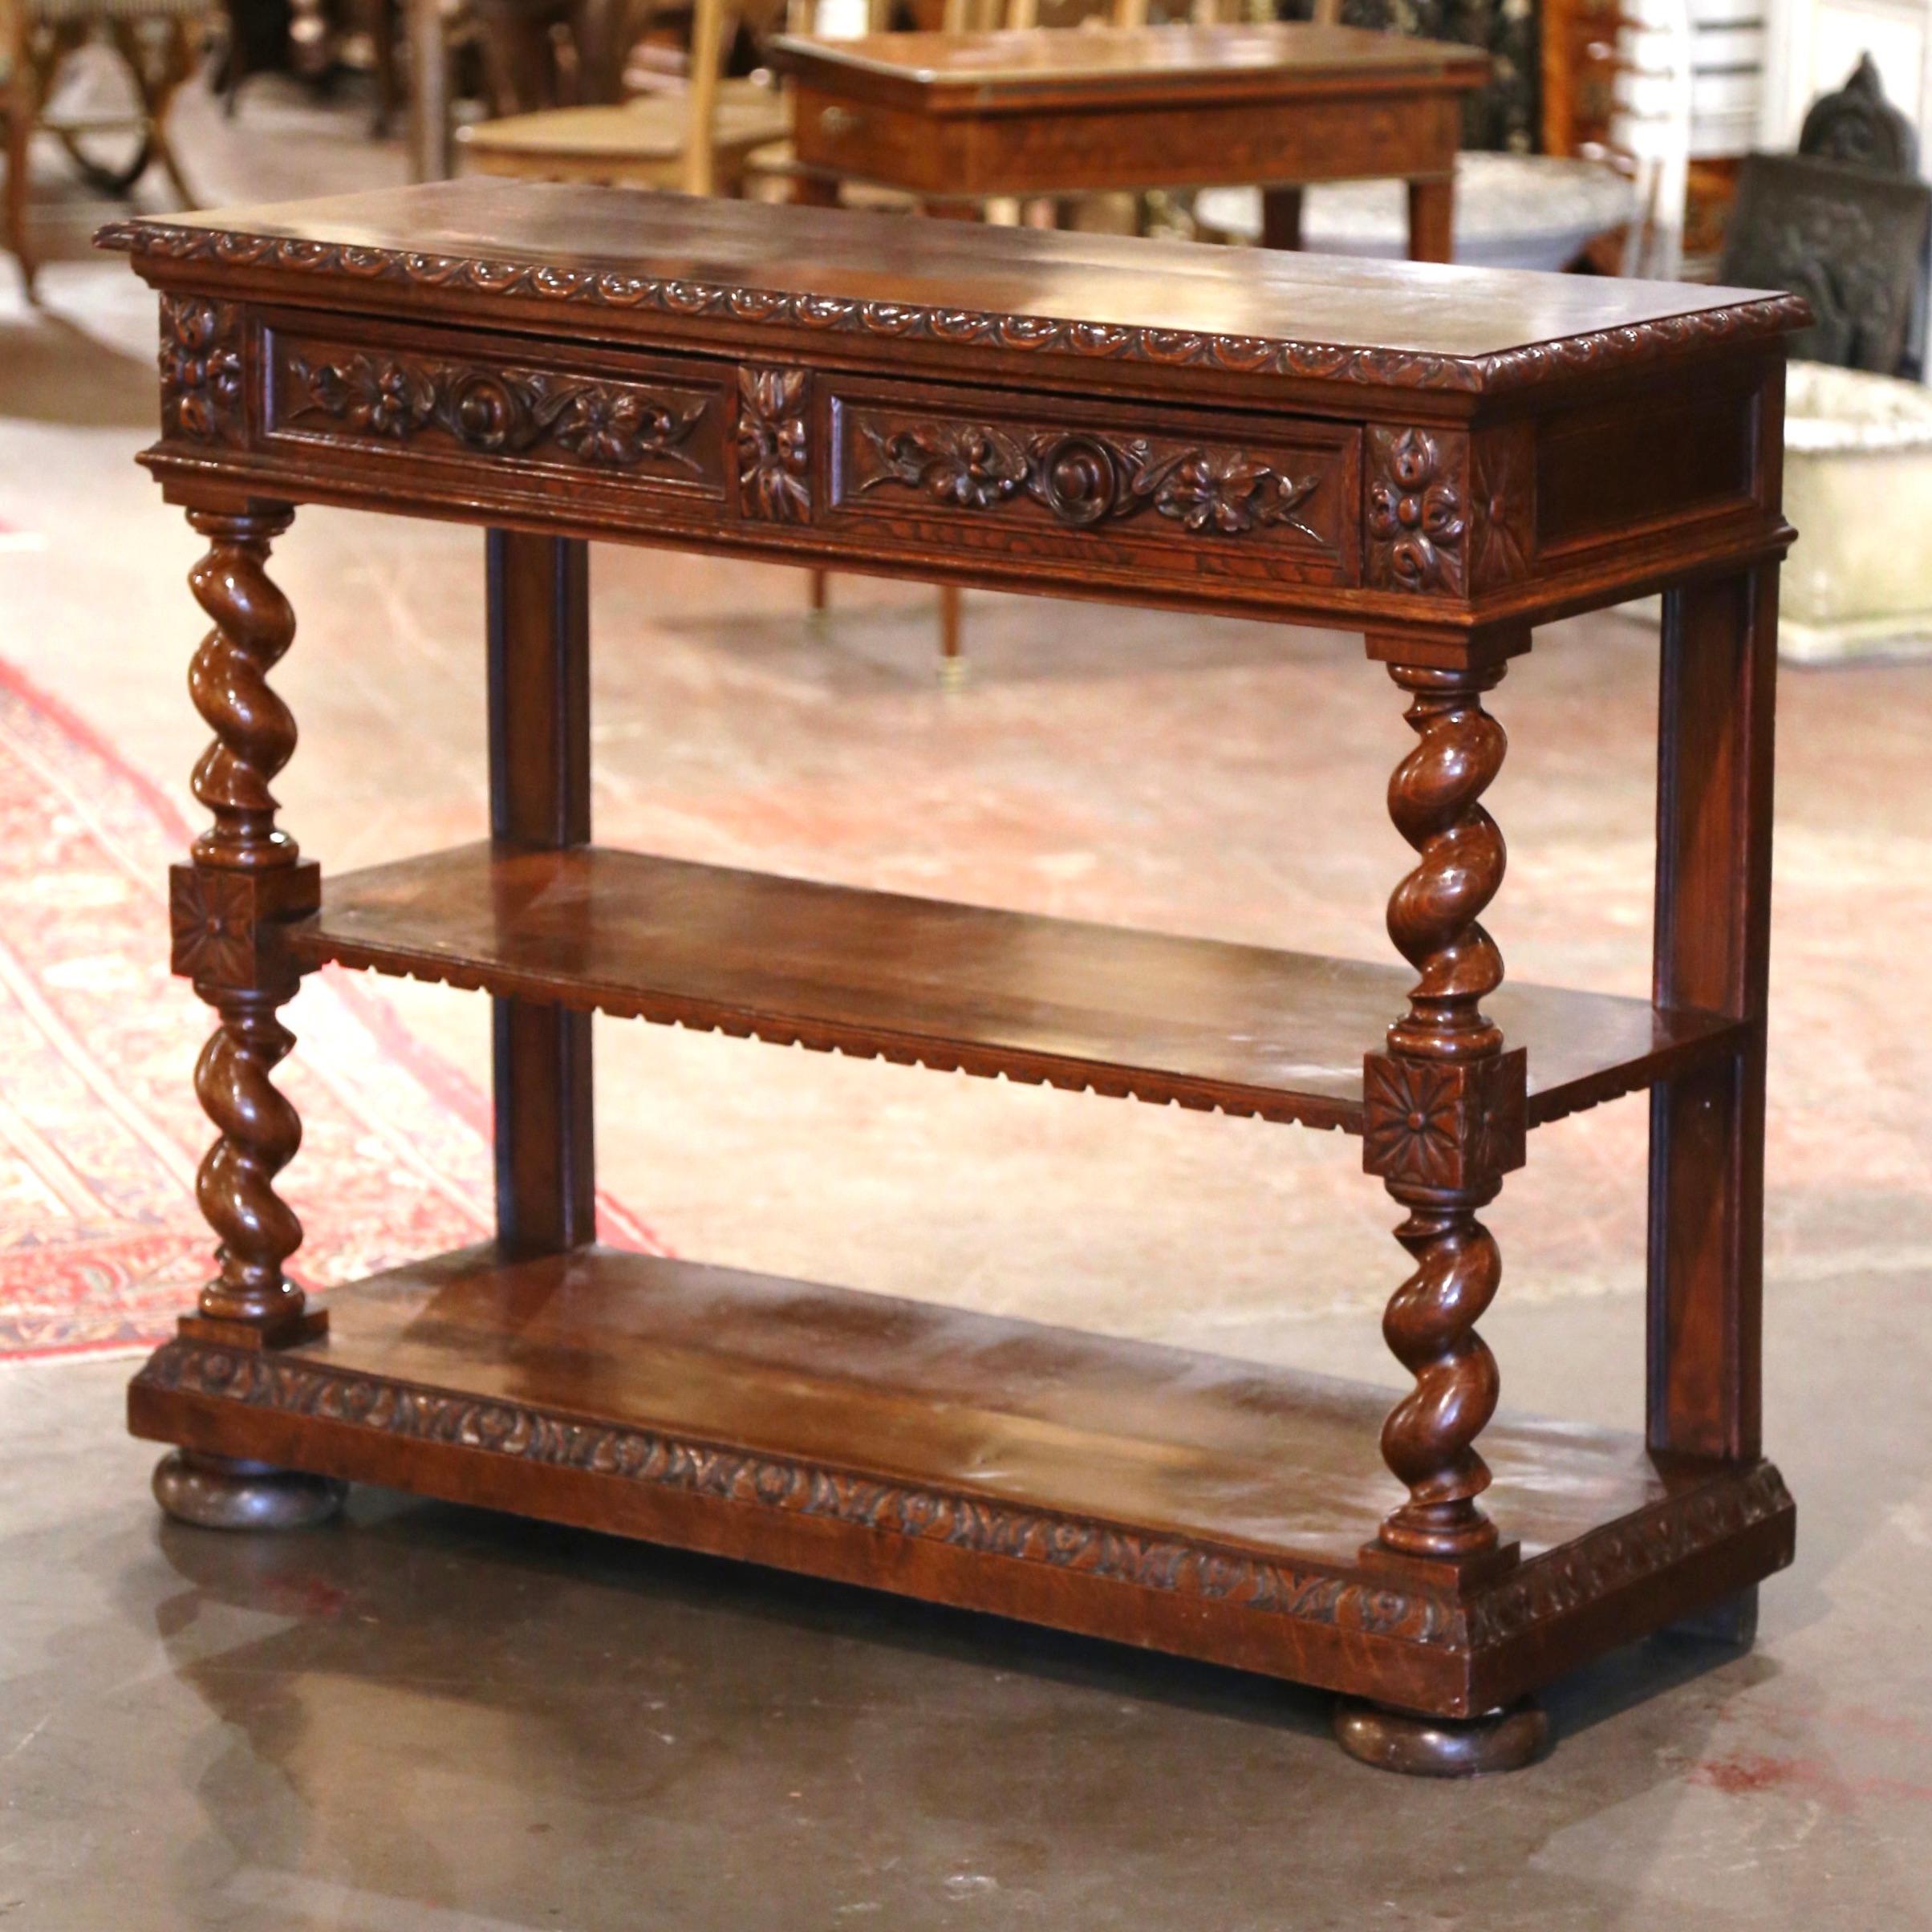 Crafted in France circa 1870, and built of oak wood, the antique console stands on barley twist legs embellished with floral rosette medallions at the shoulders, and ending with bun feet over a decorative plinth base. The desserte surface lifts up